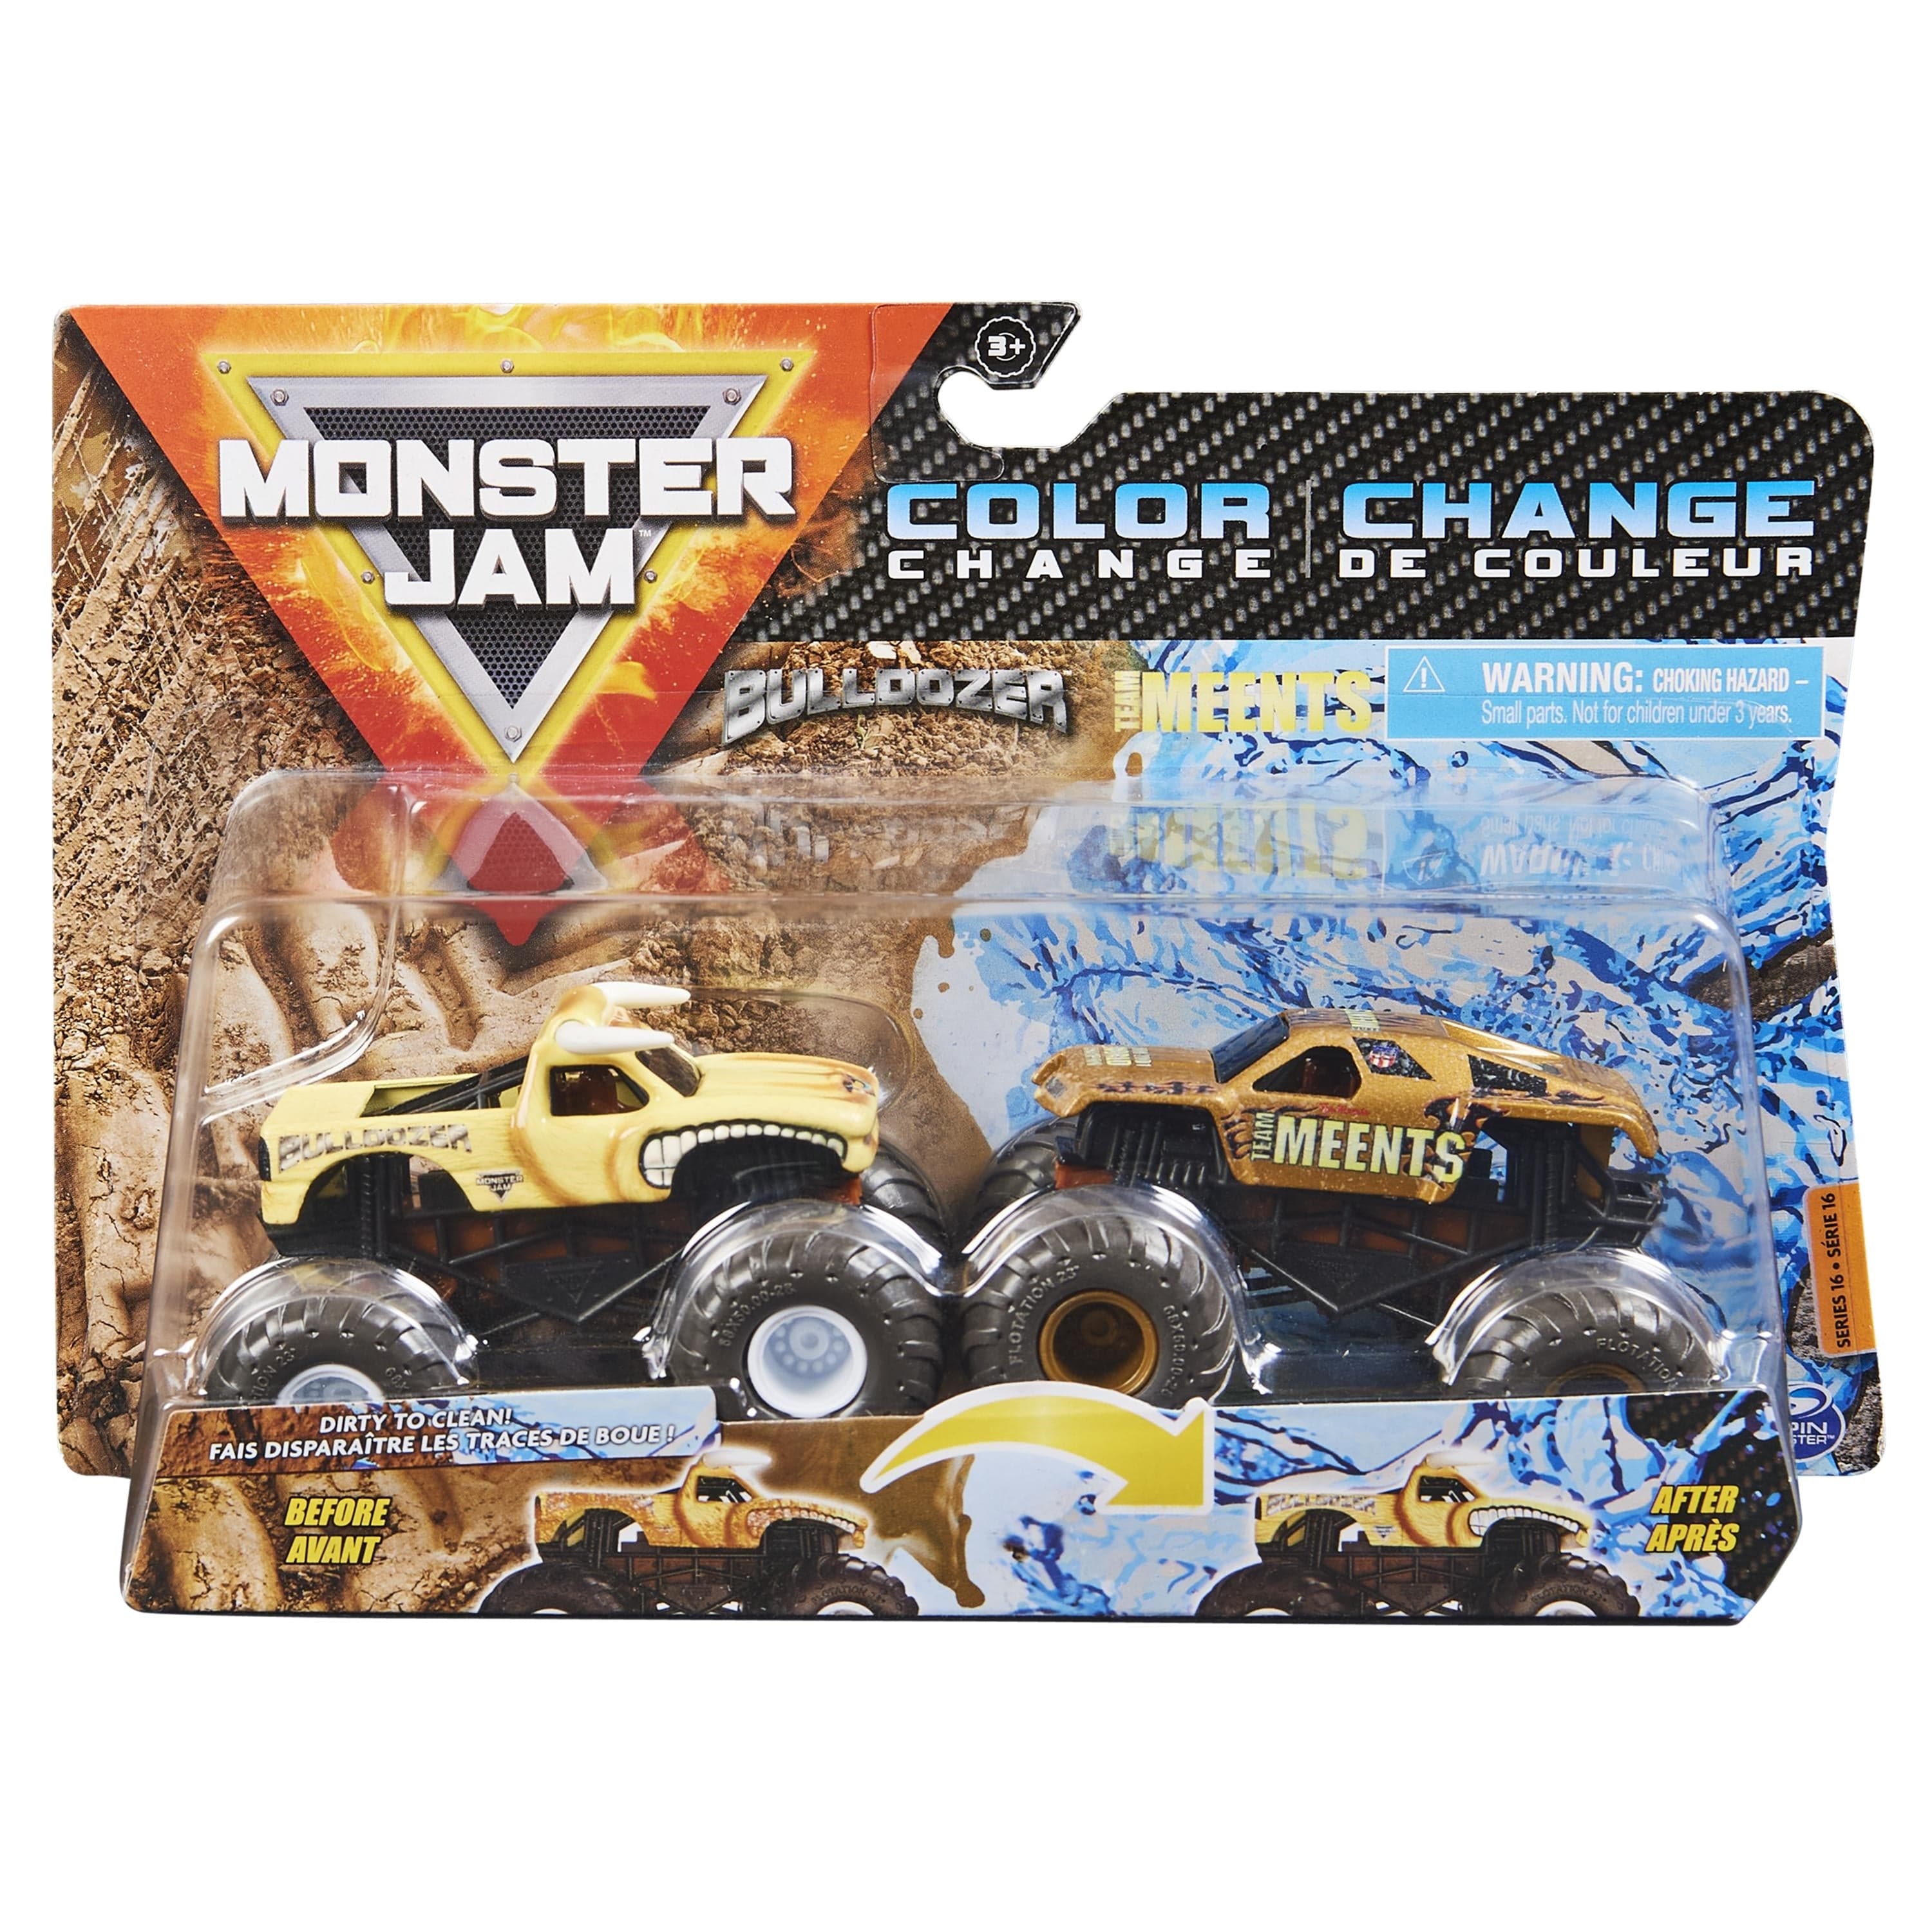 Spin Master-Monster Jam: Color-Changing Die-Cast Monster Trucks 2-Pack, 1:64 Scale Assortment-20129571-Bulldozer vs Team Meents-Legacy Toys